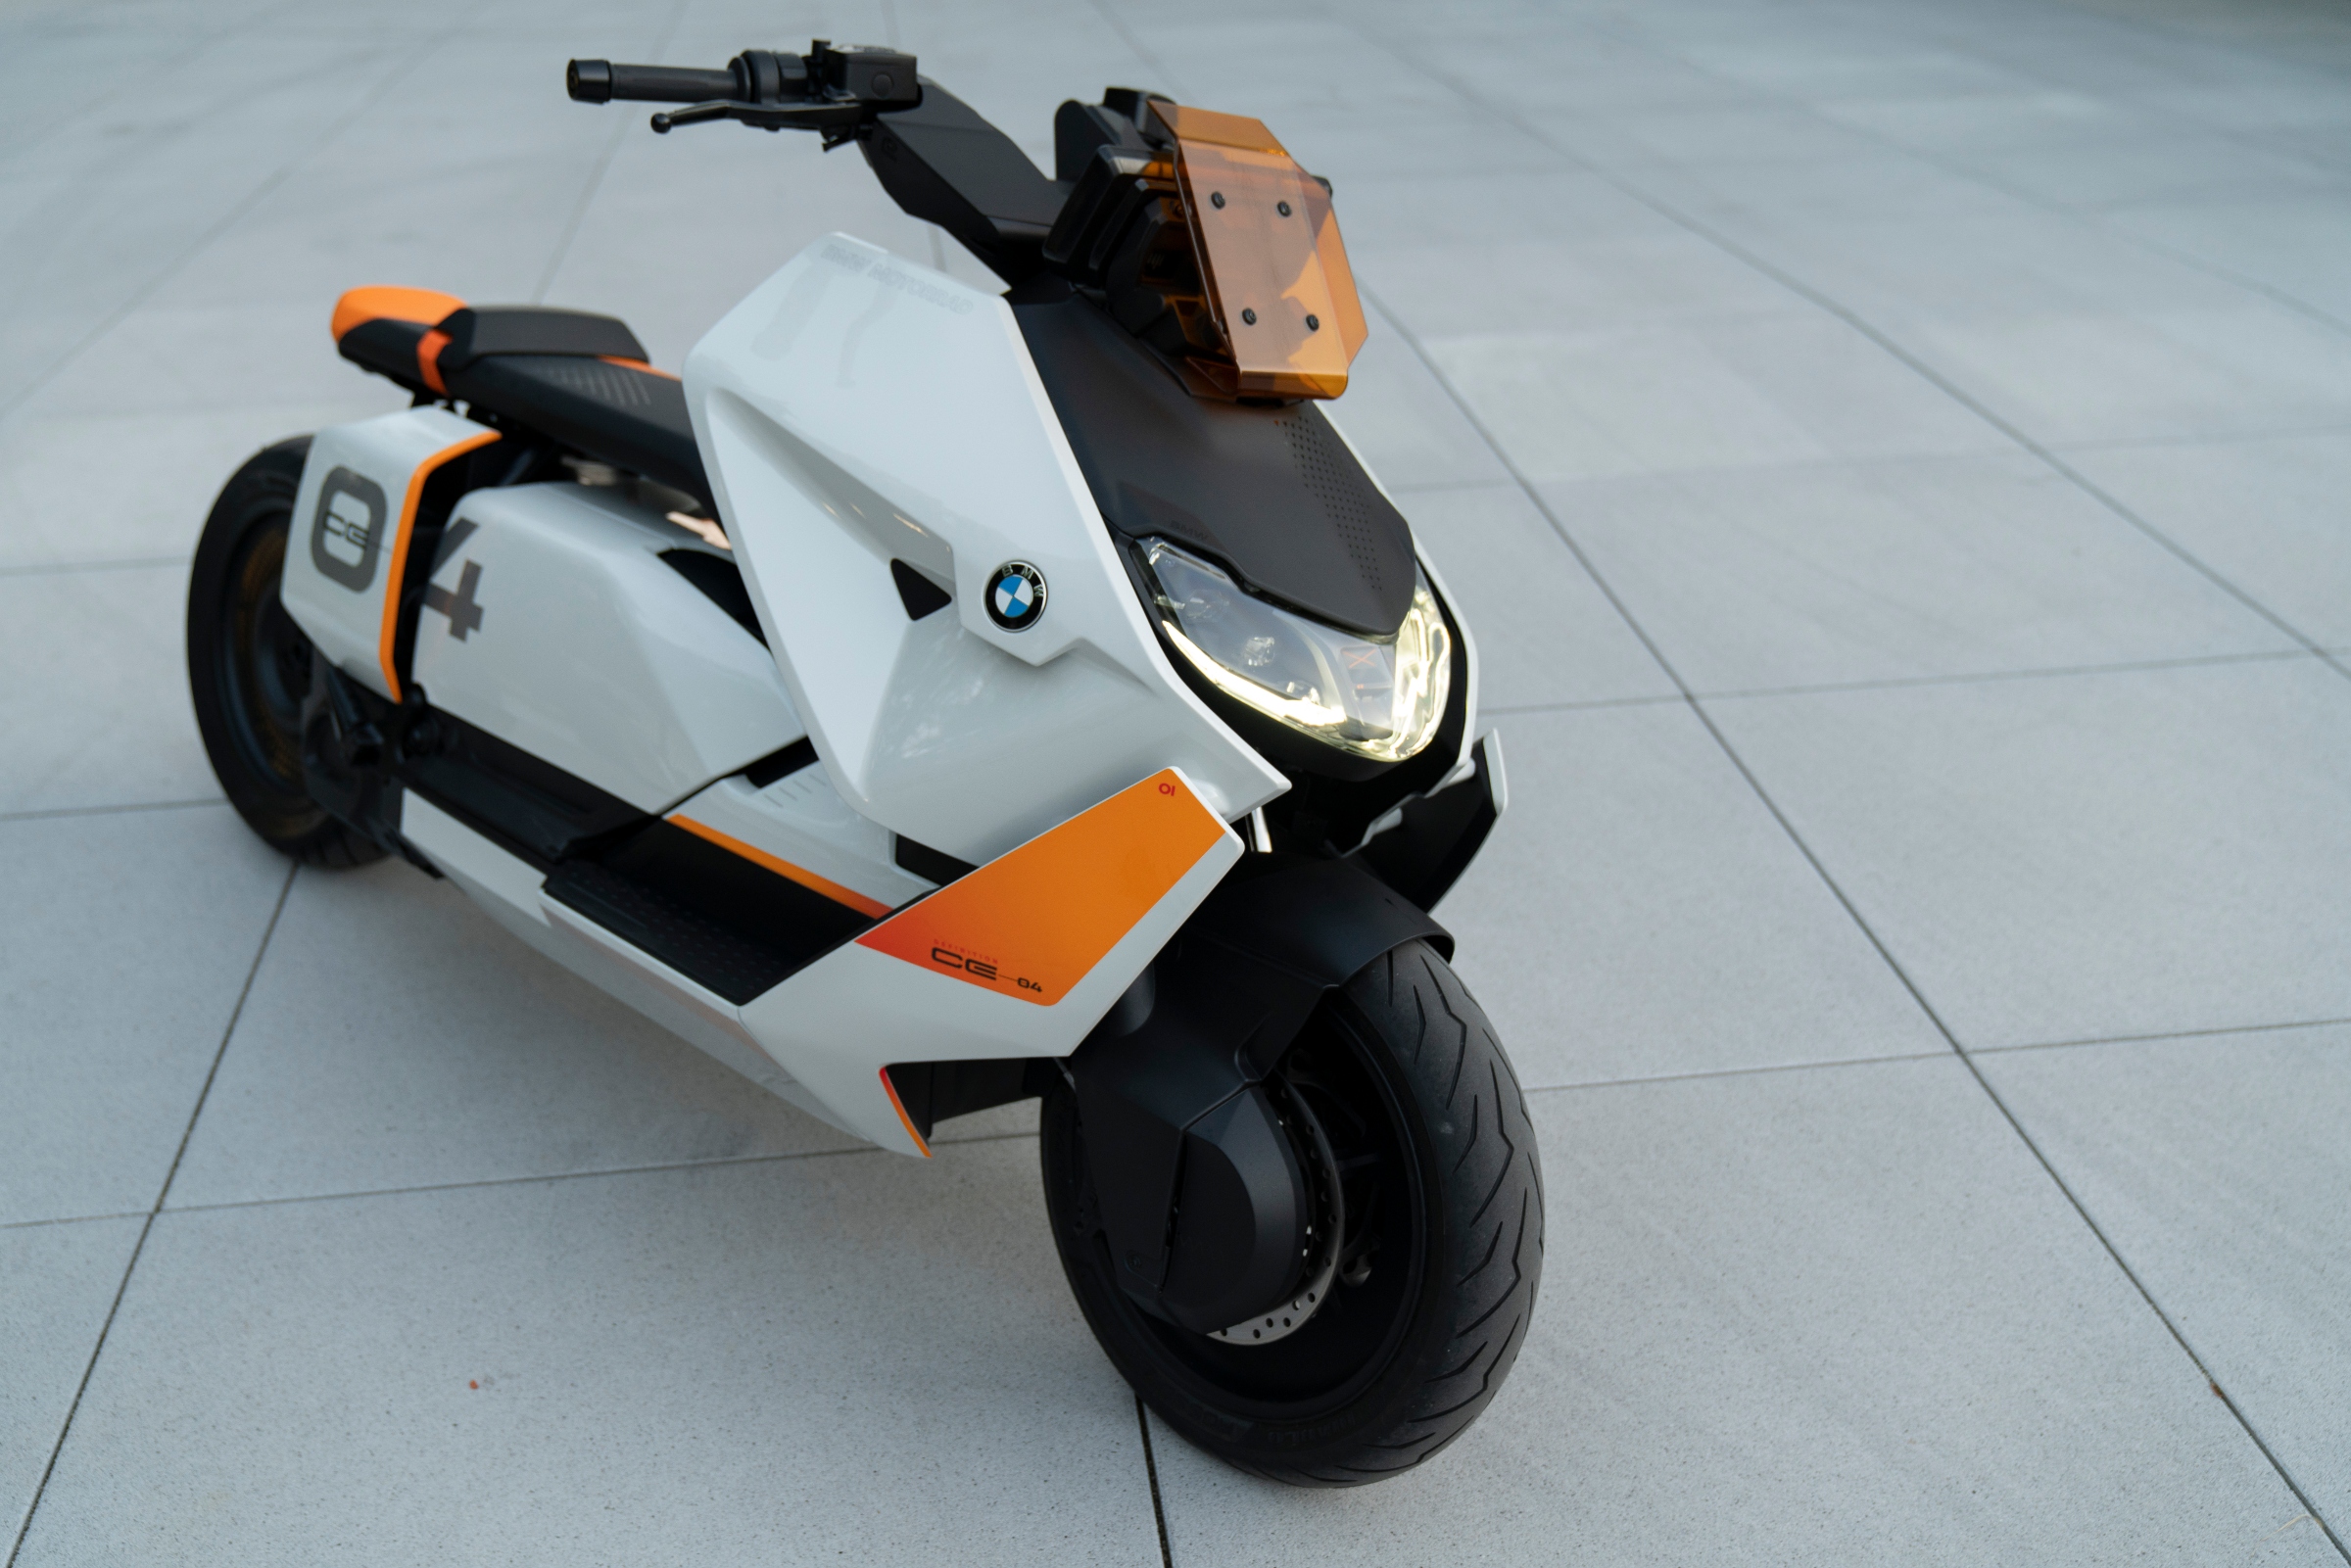 BMW Definition CE 04 redefines the humble scooter in a Visordown